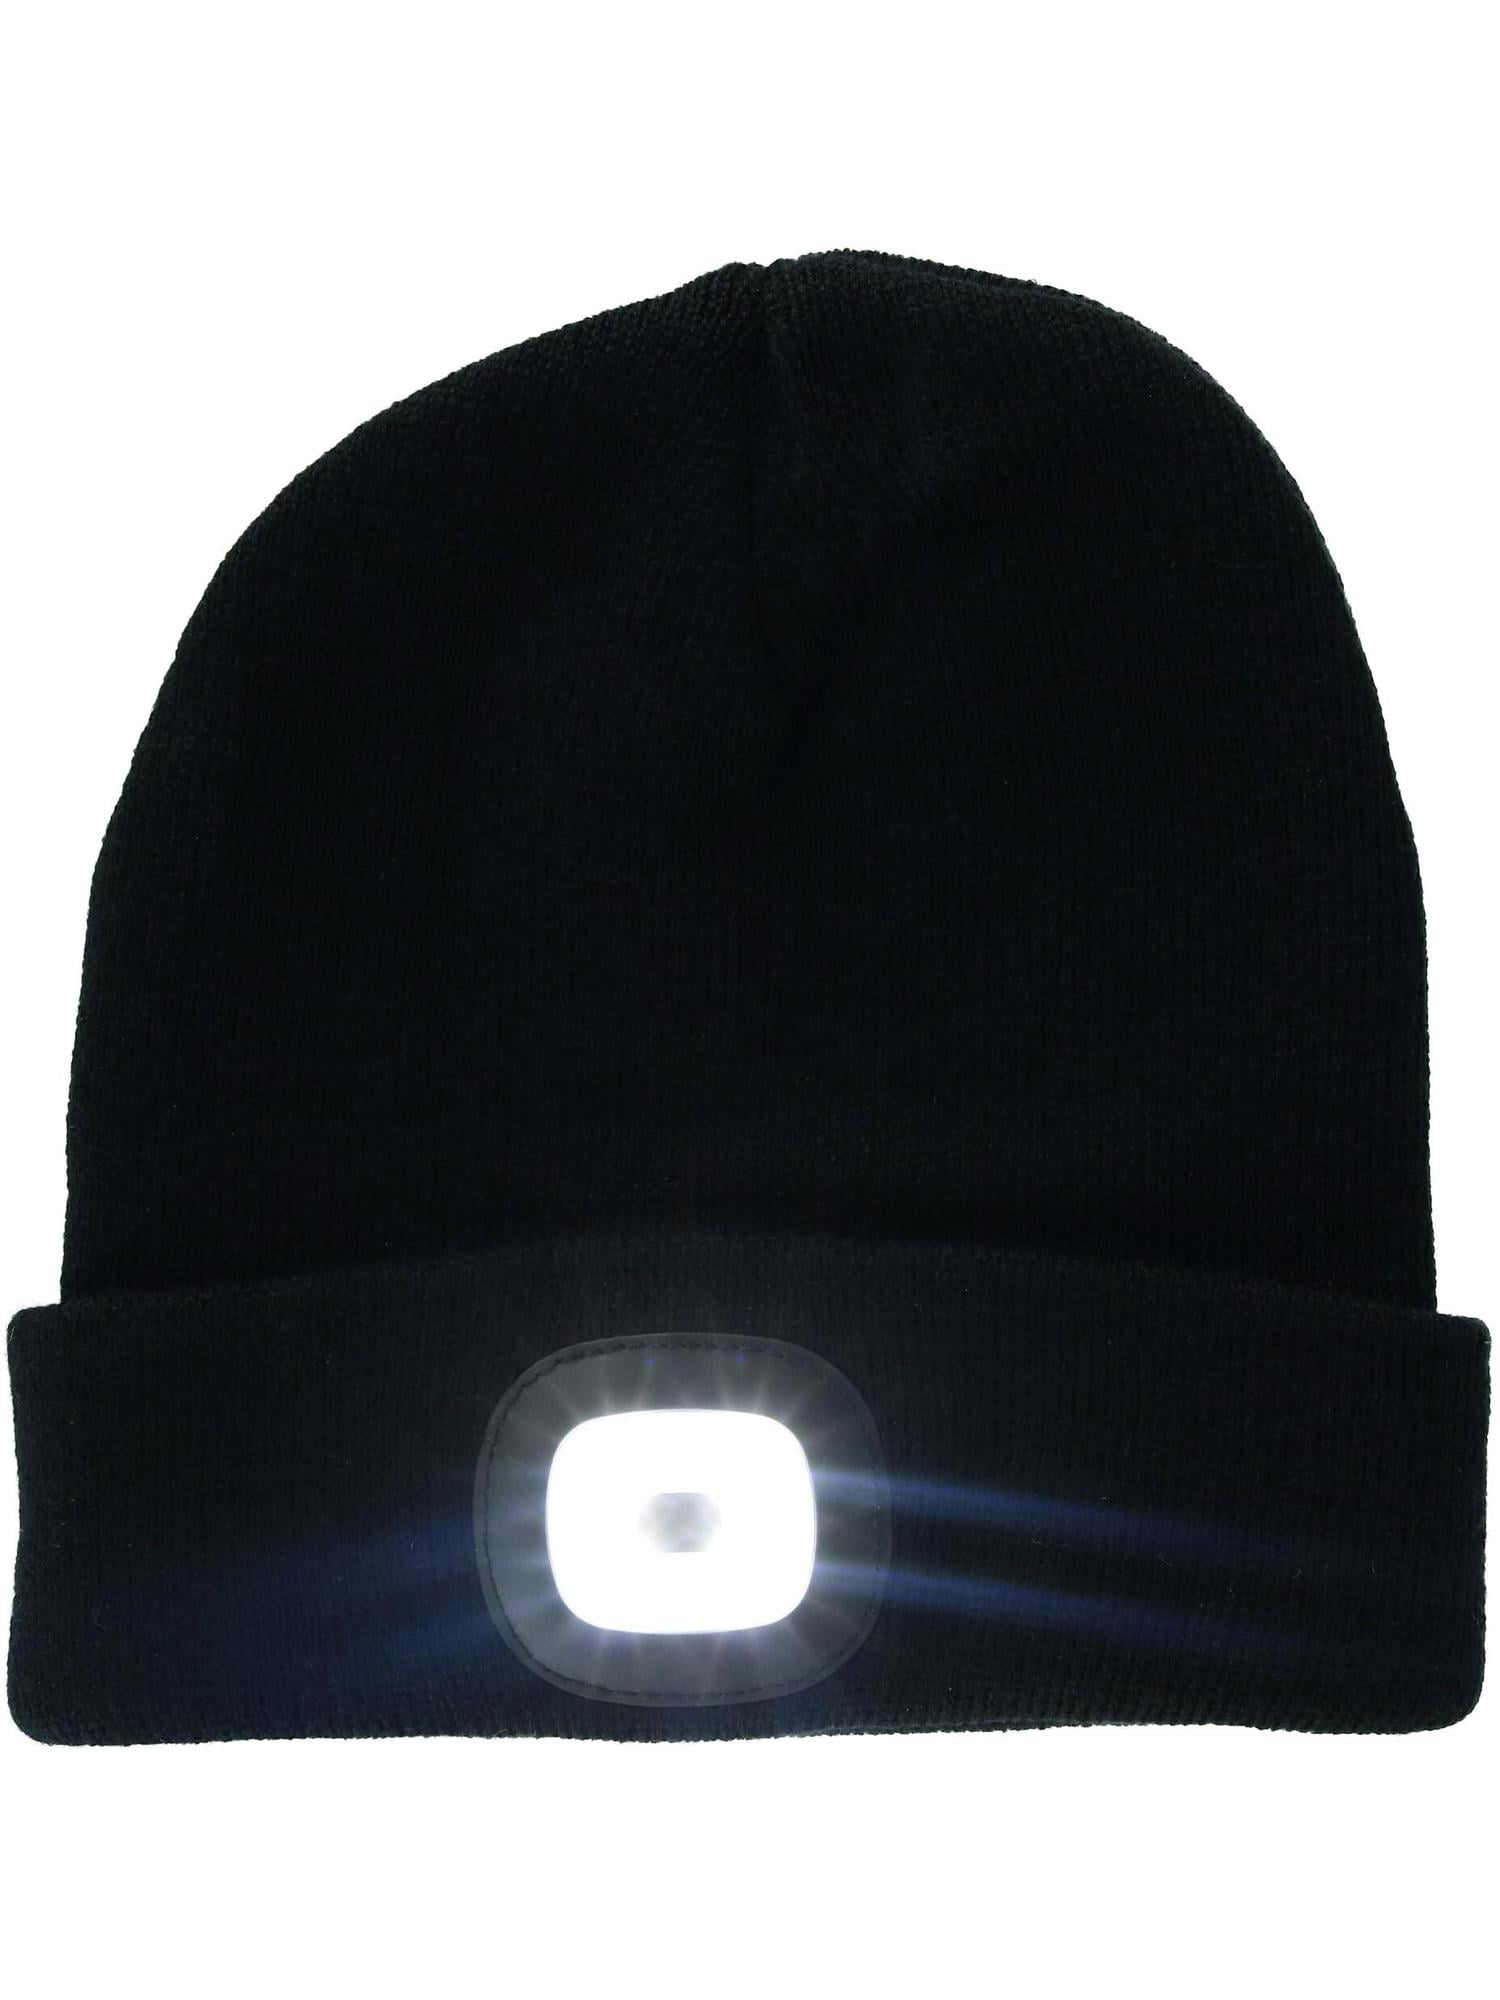 Night Scope Classic LED Rechargeable Knit Beanie Warm Head Light Hat Headlamp for Outdoor Activities 